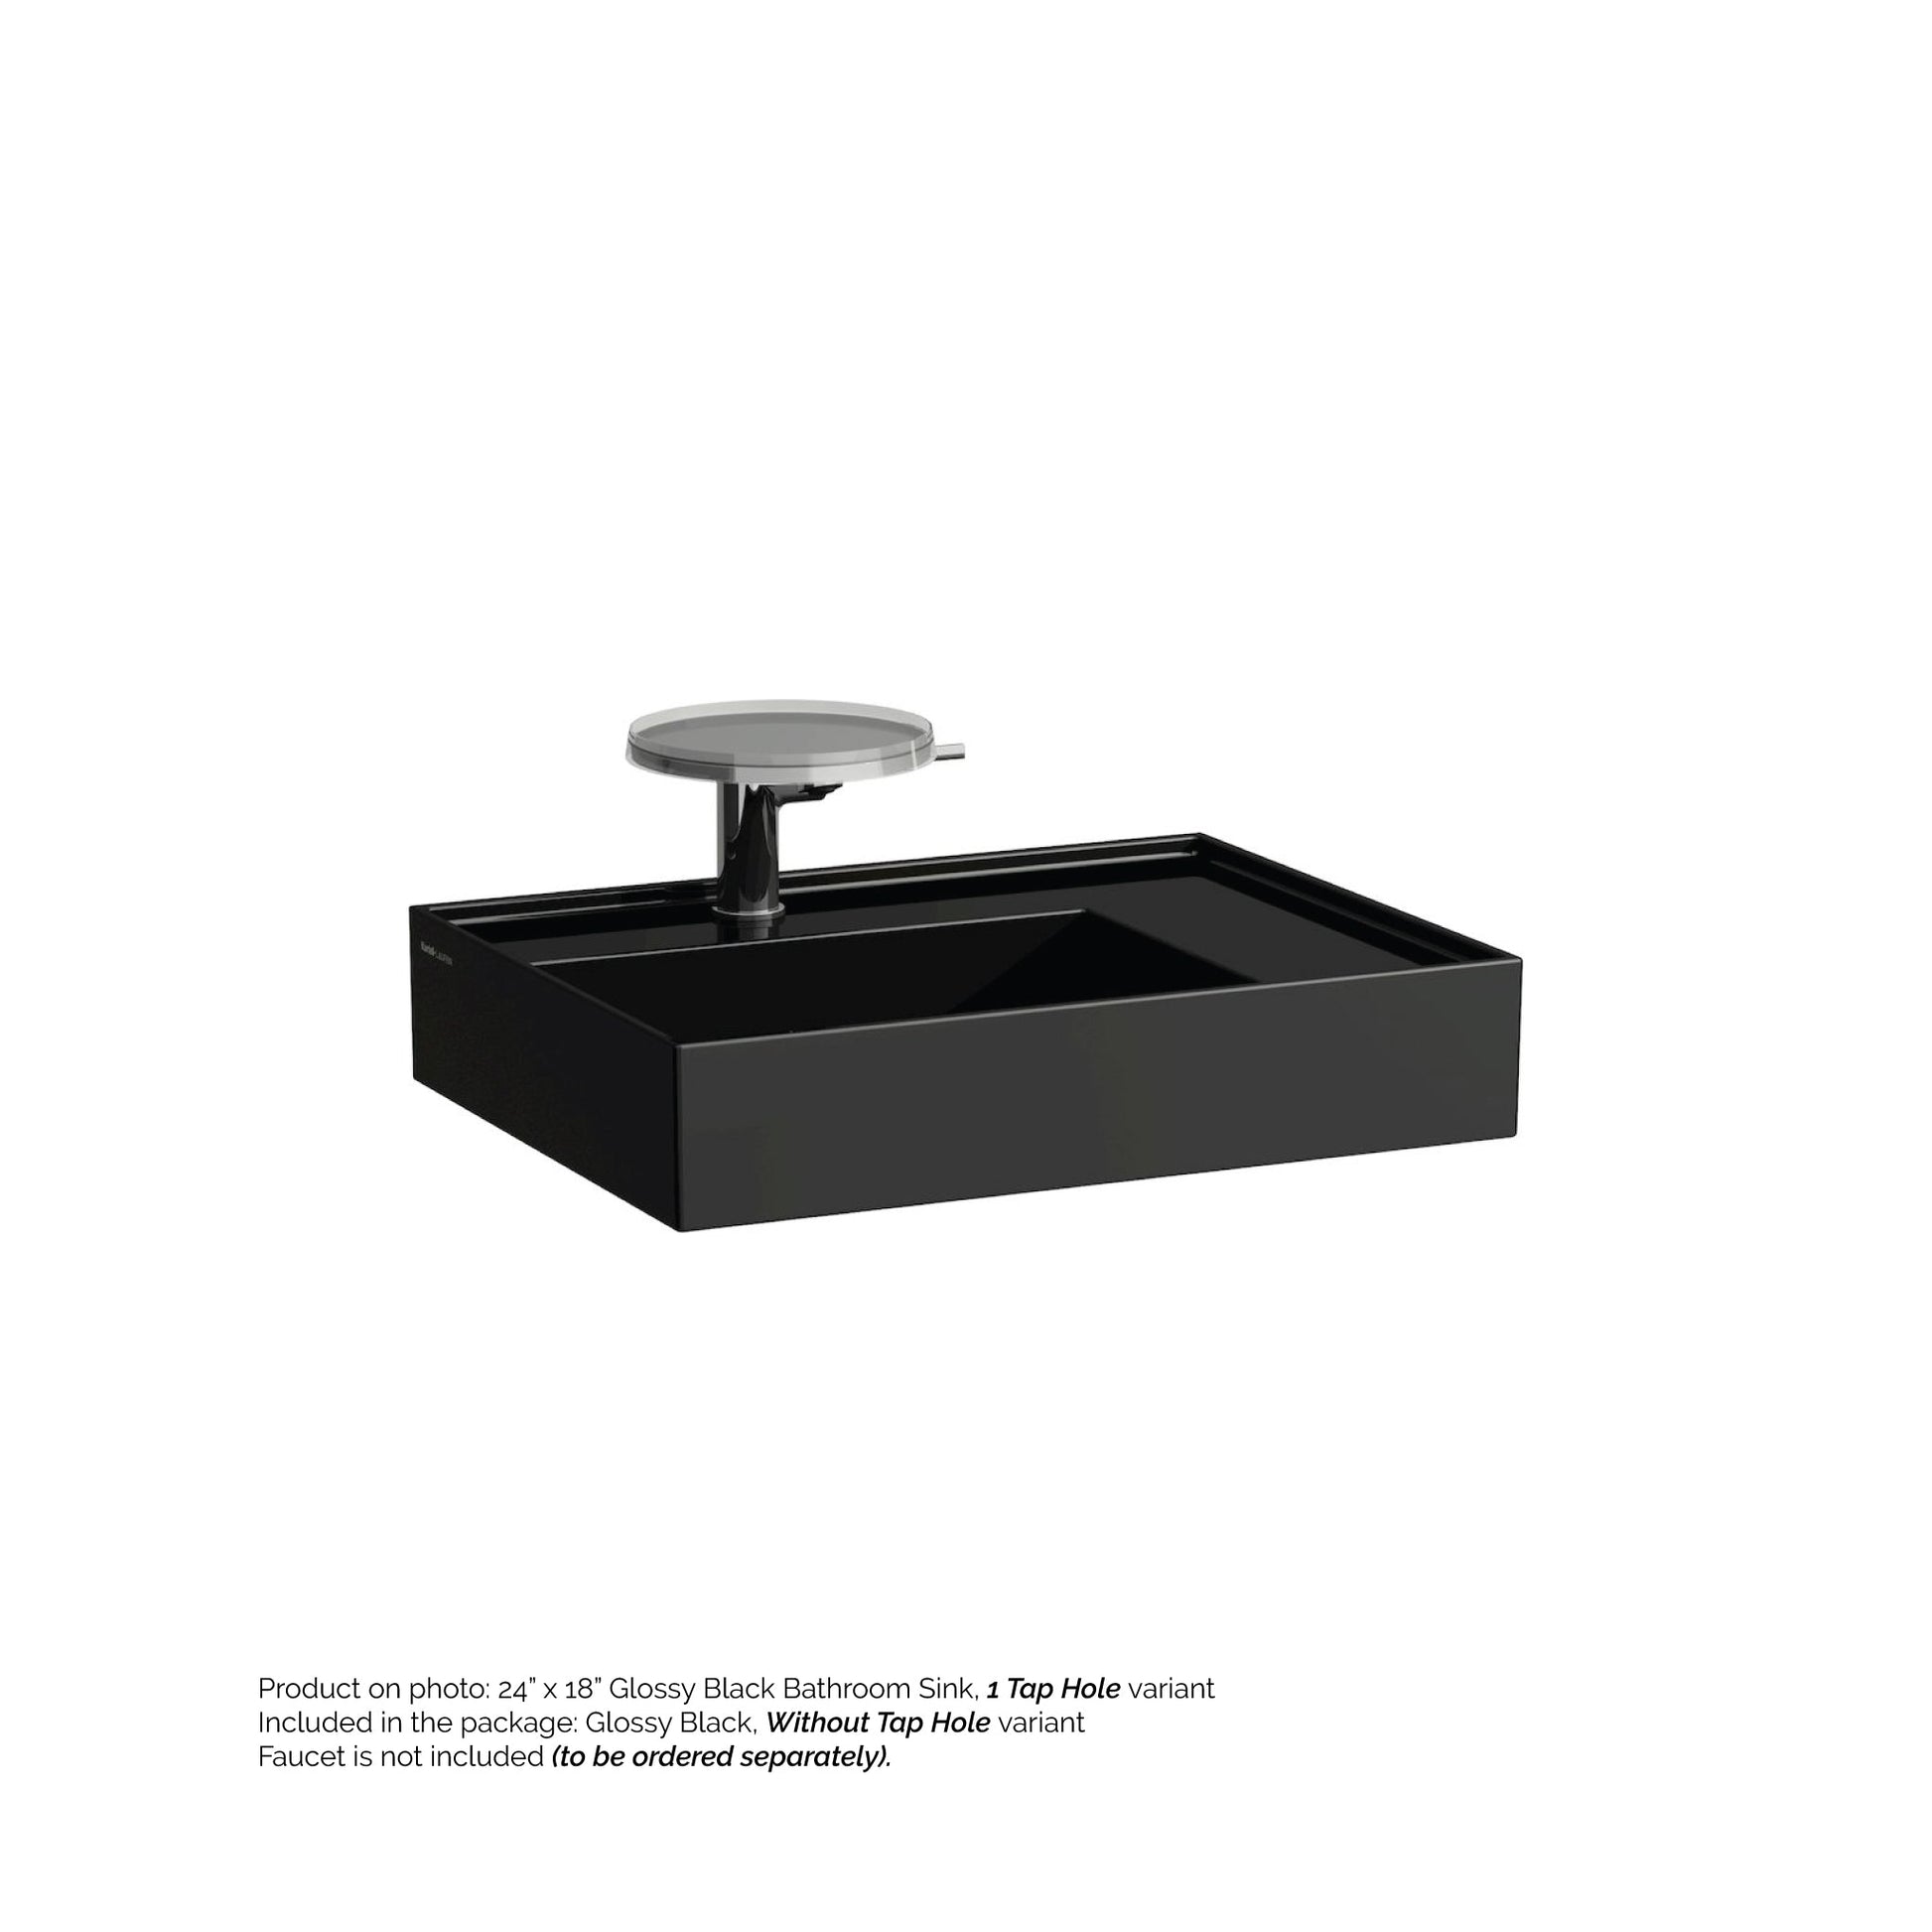 Laufen Kartell 24" x 18" Glossy Black Wall-Mounted Shelf-Right Bathroom Sink Without Faucet Hole